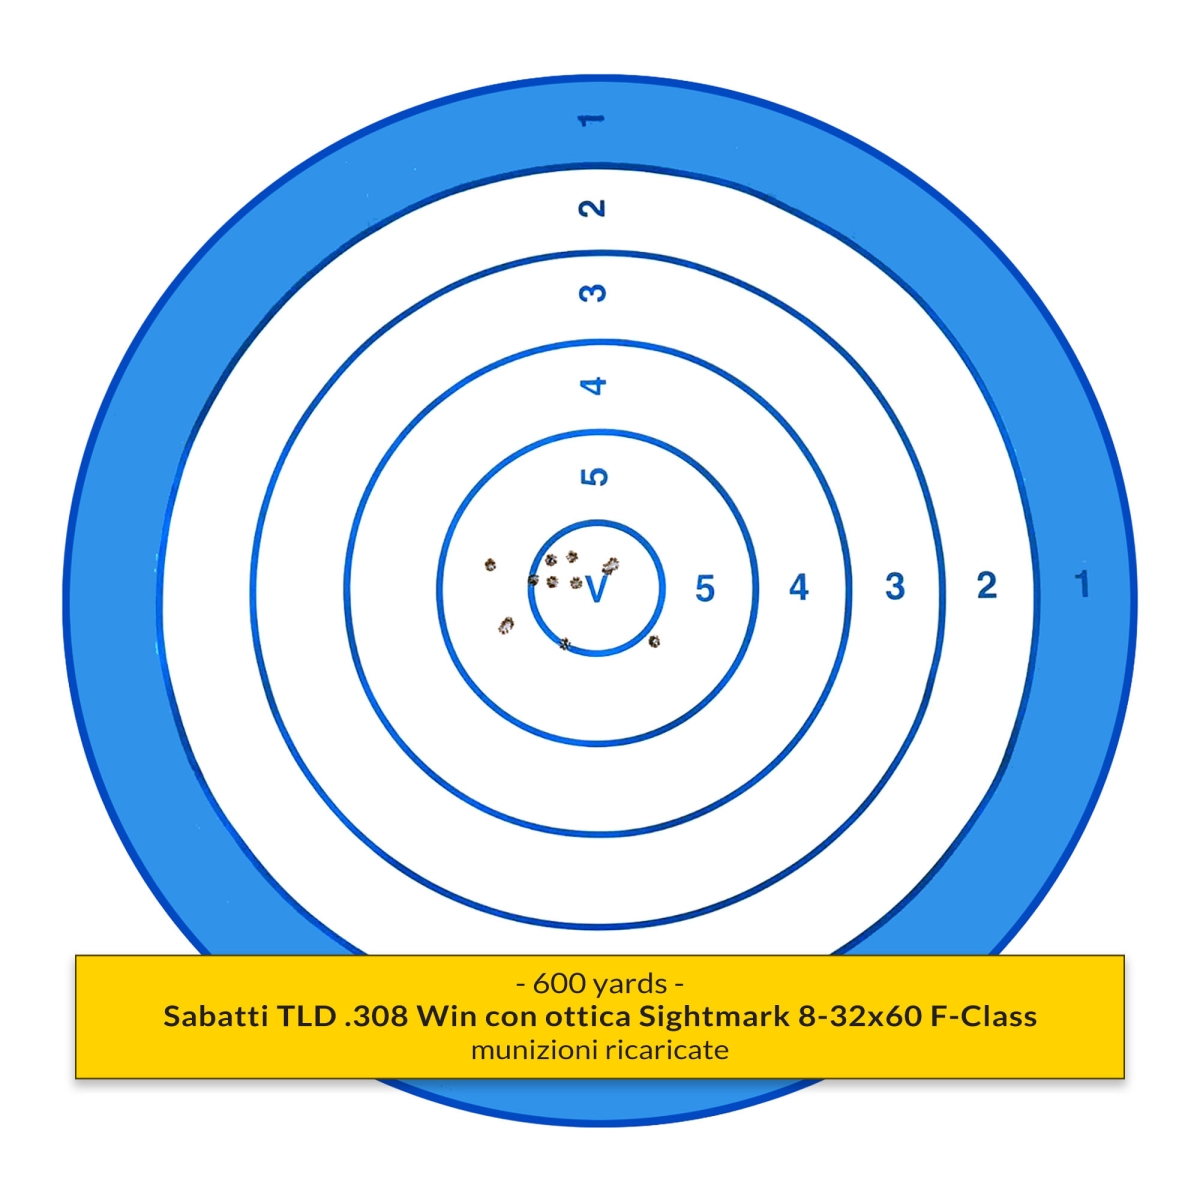 600 yards group by our shooter Carlo Boccini with Sightmark Latitude 8-32x60 F-Class rifle scope (see opening picture)